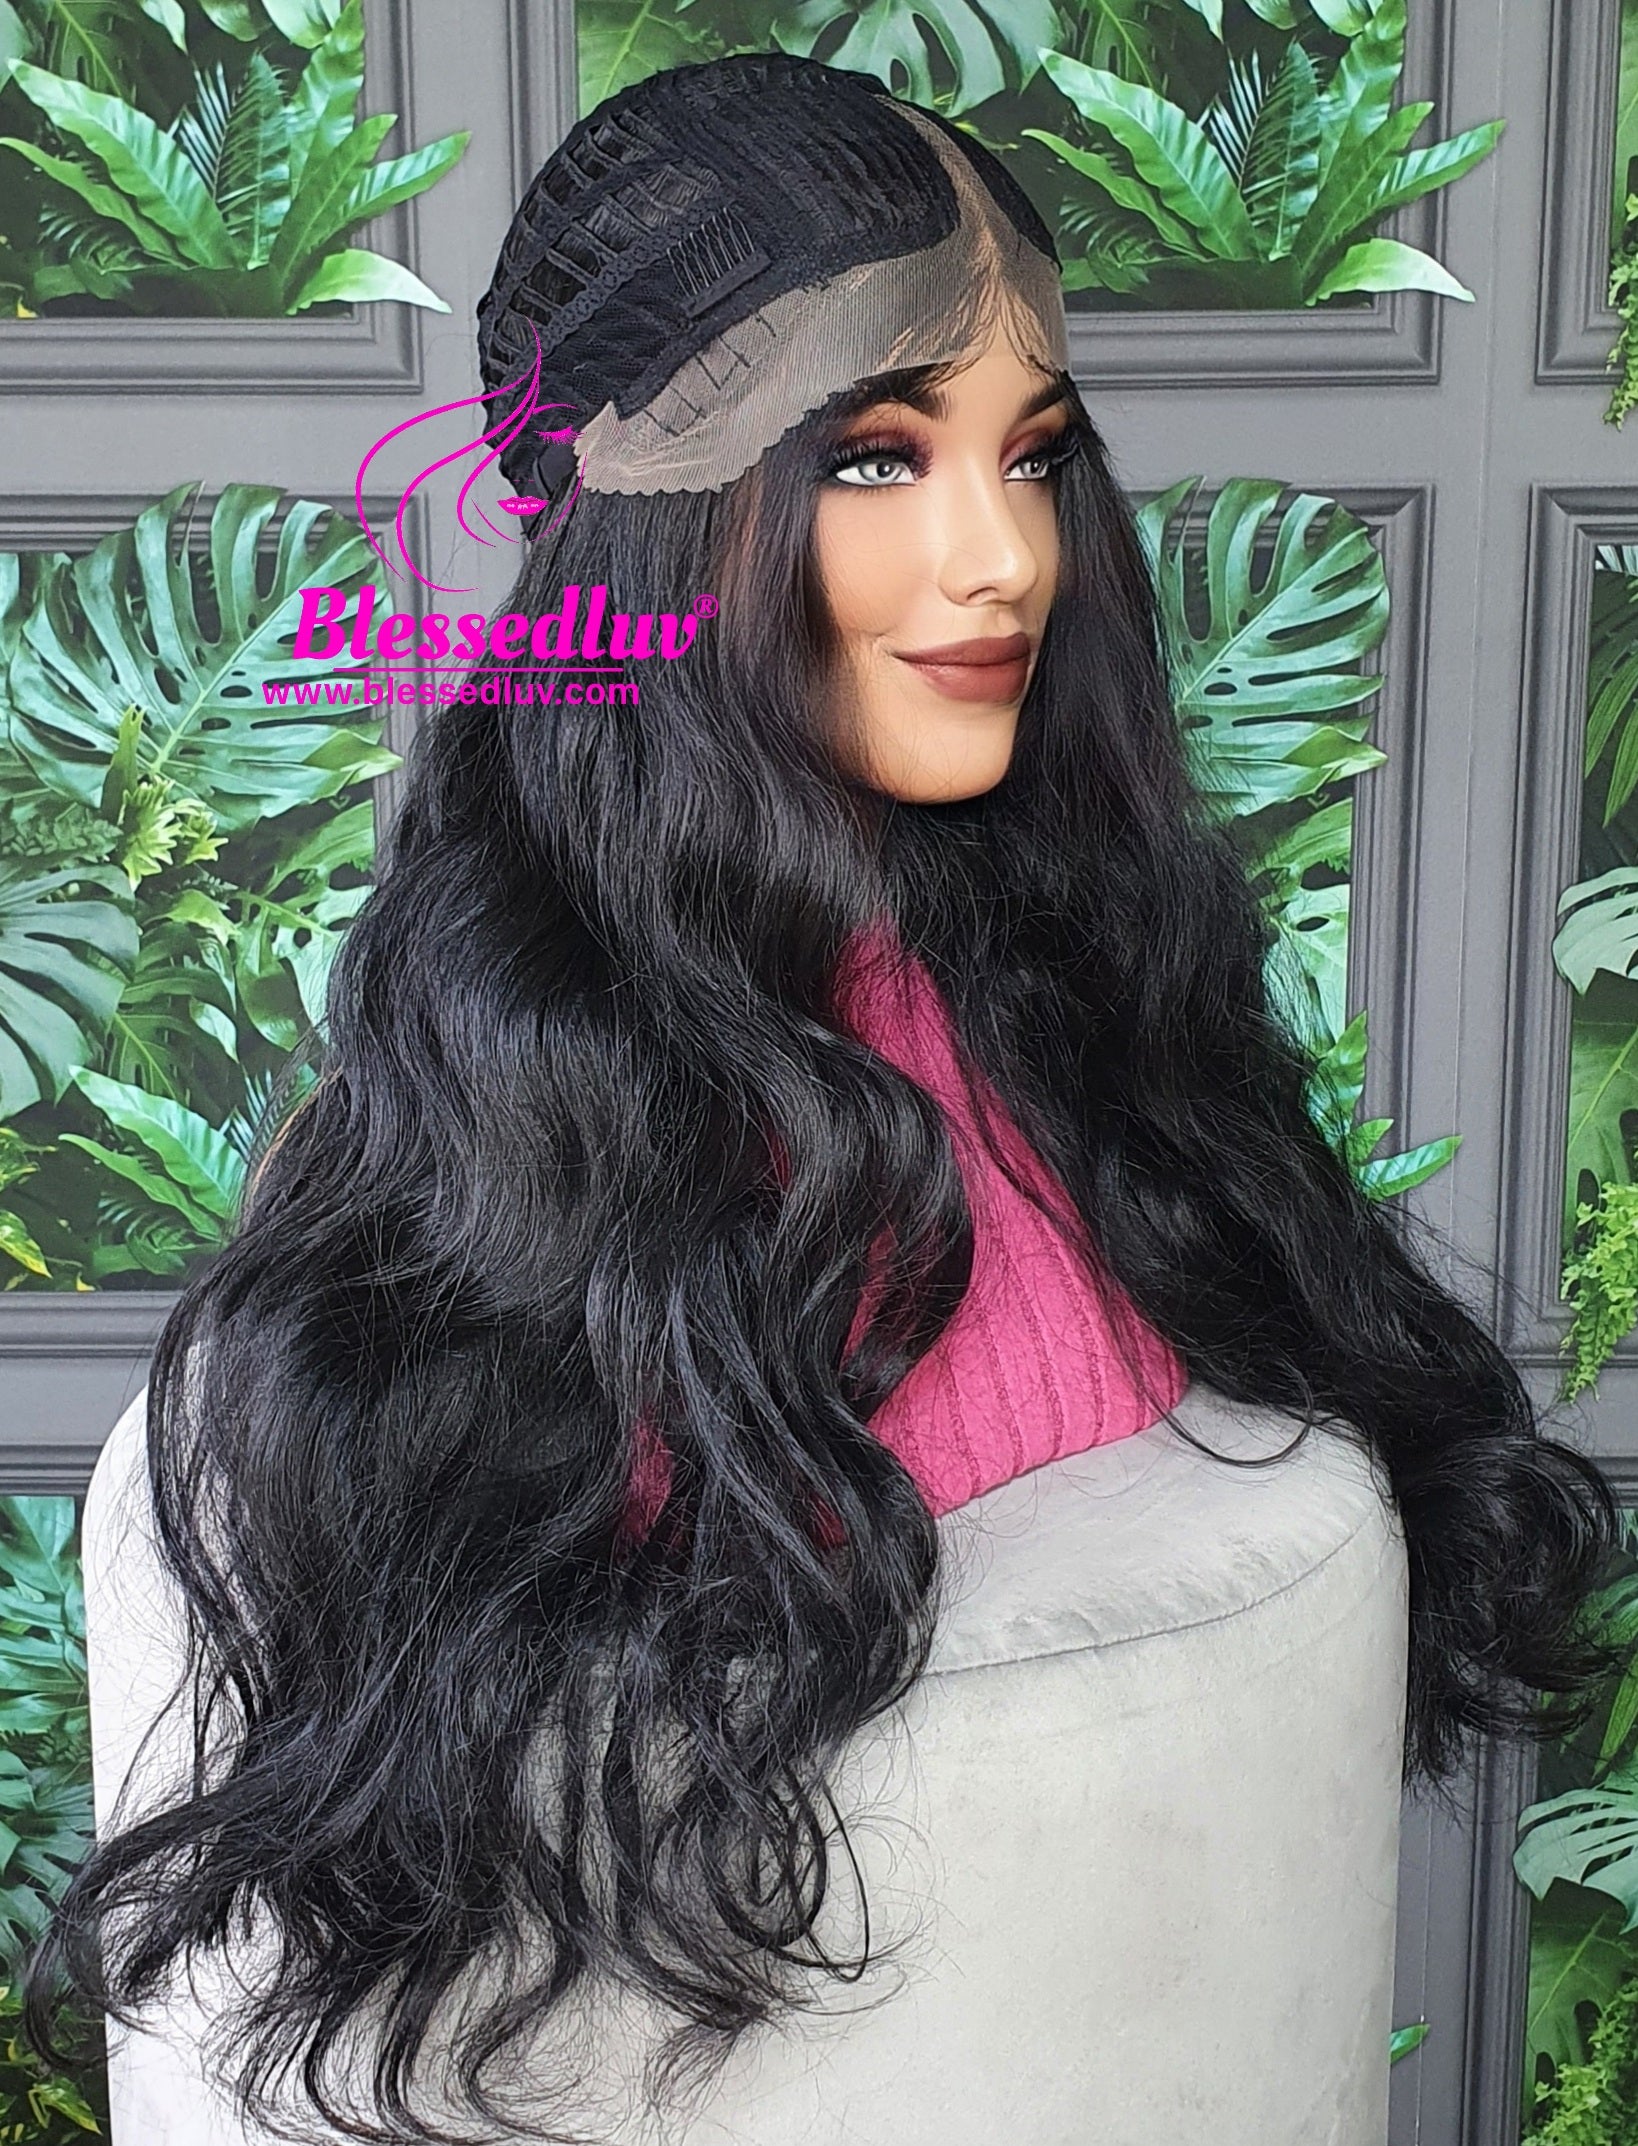 Nelly - Synthetic Coarse Lace Front Wig-Wigs-www.blessedluv.com-Brazilianweave.com